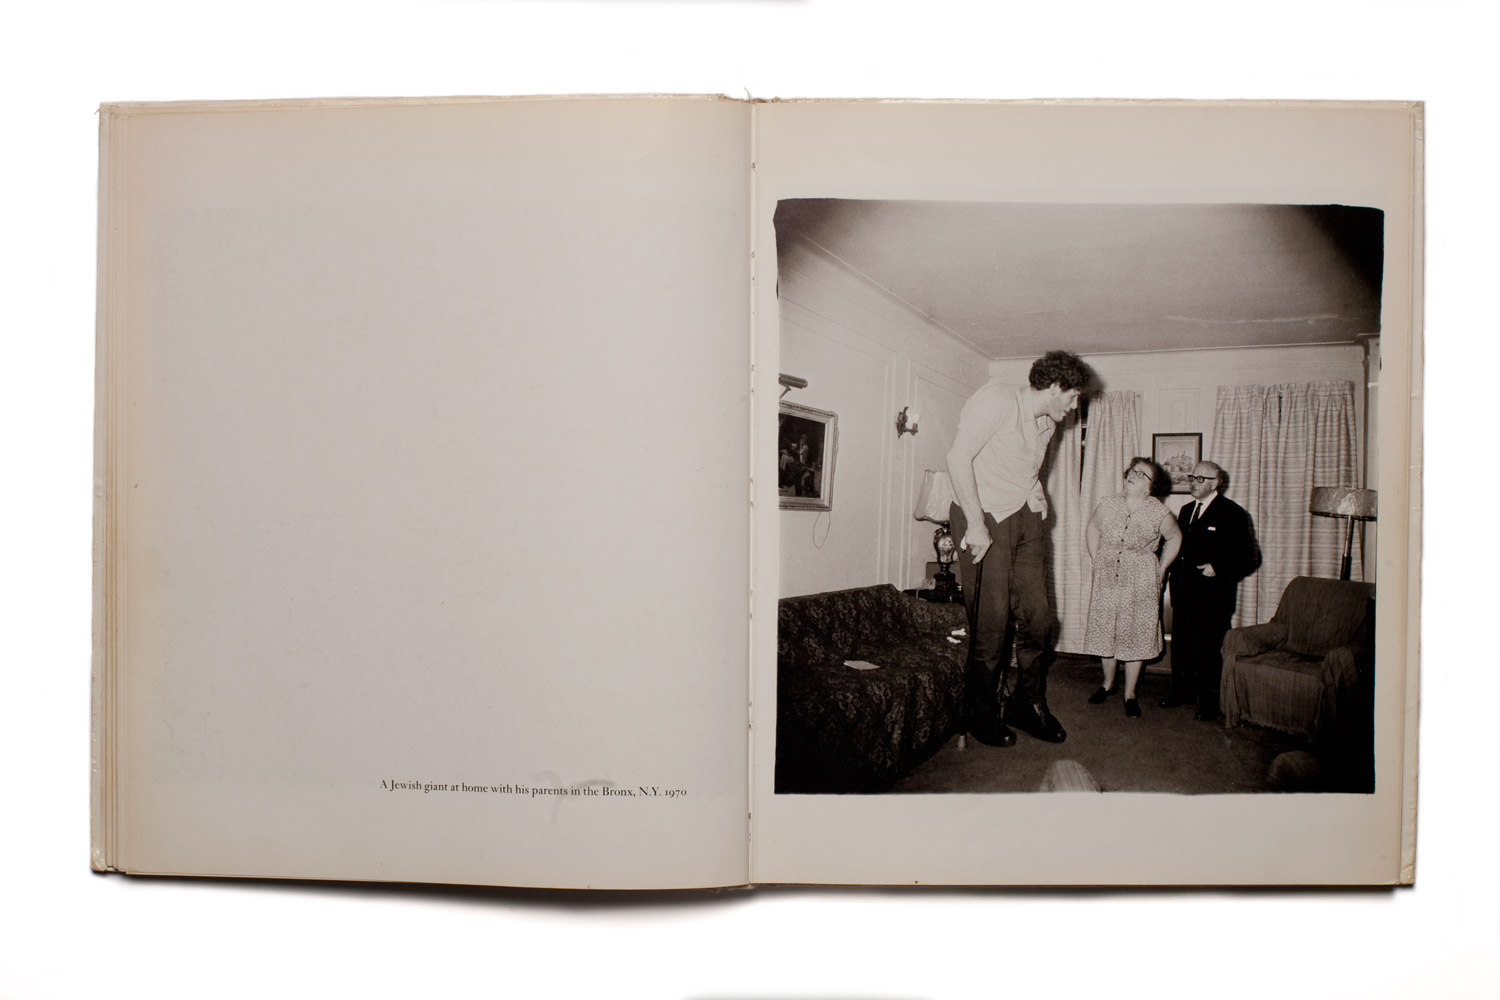 The monograph of eighty photographs was edited and designed by Marvin Israel and by the photographer's daughter Doon Arbus.